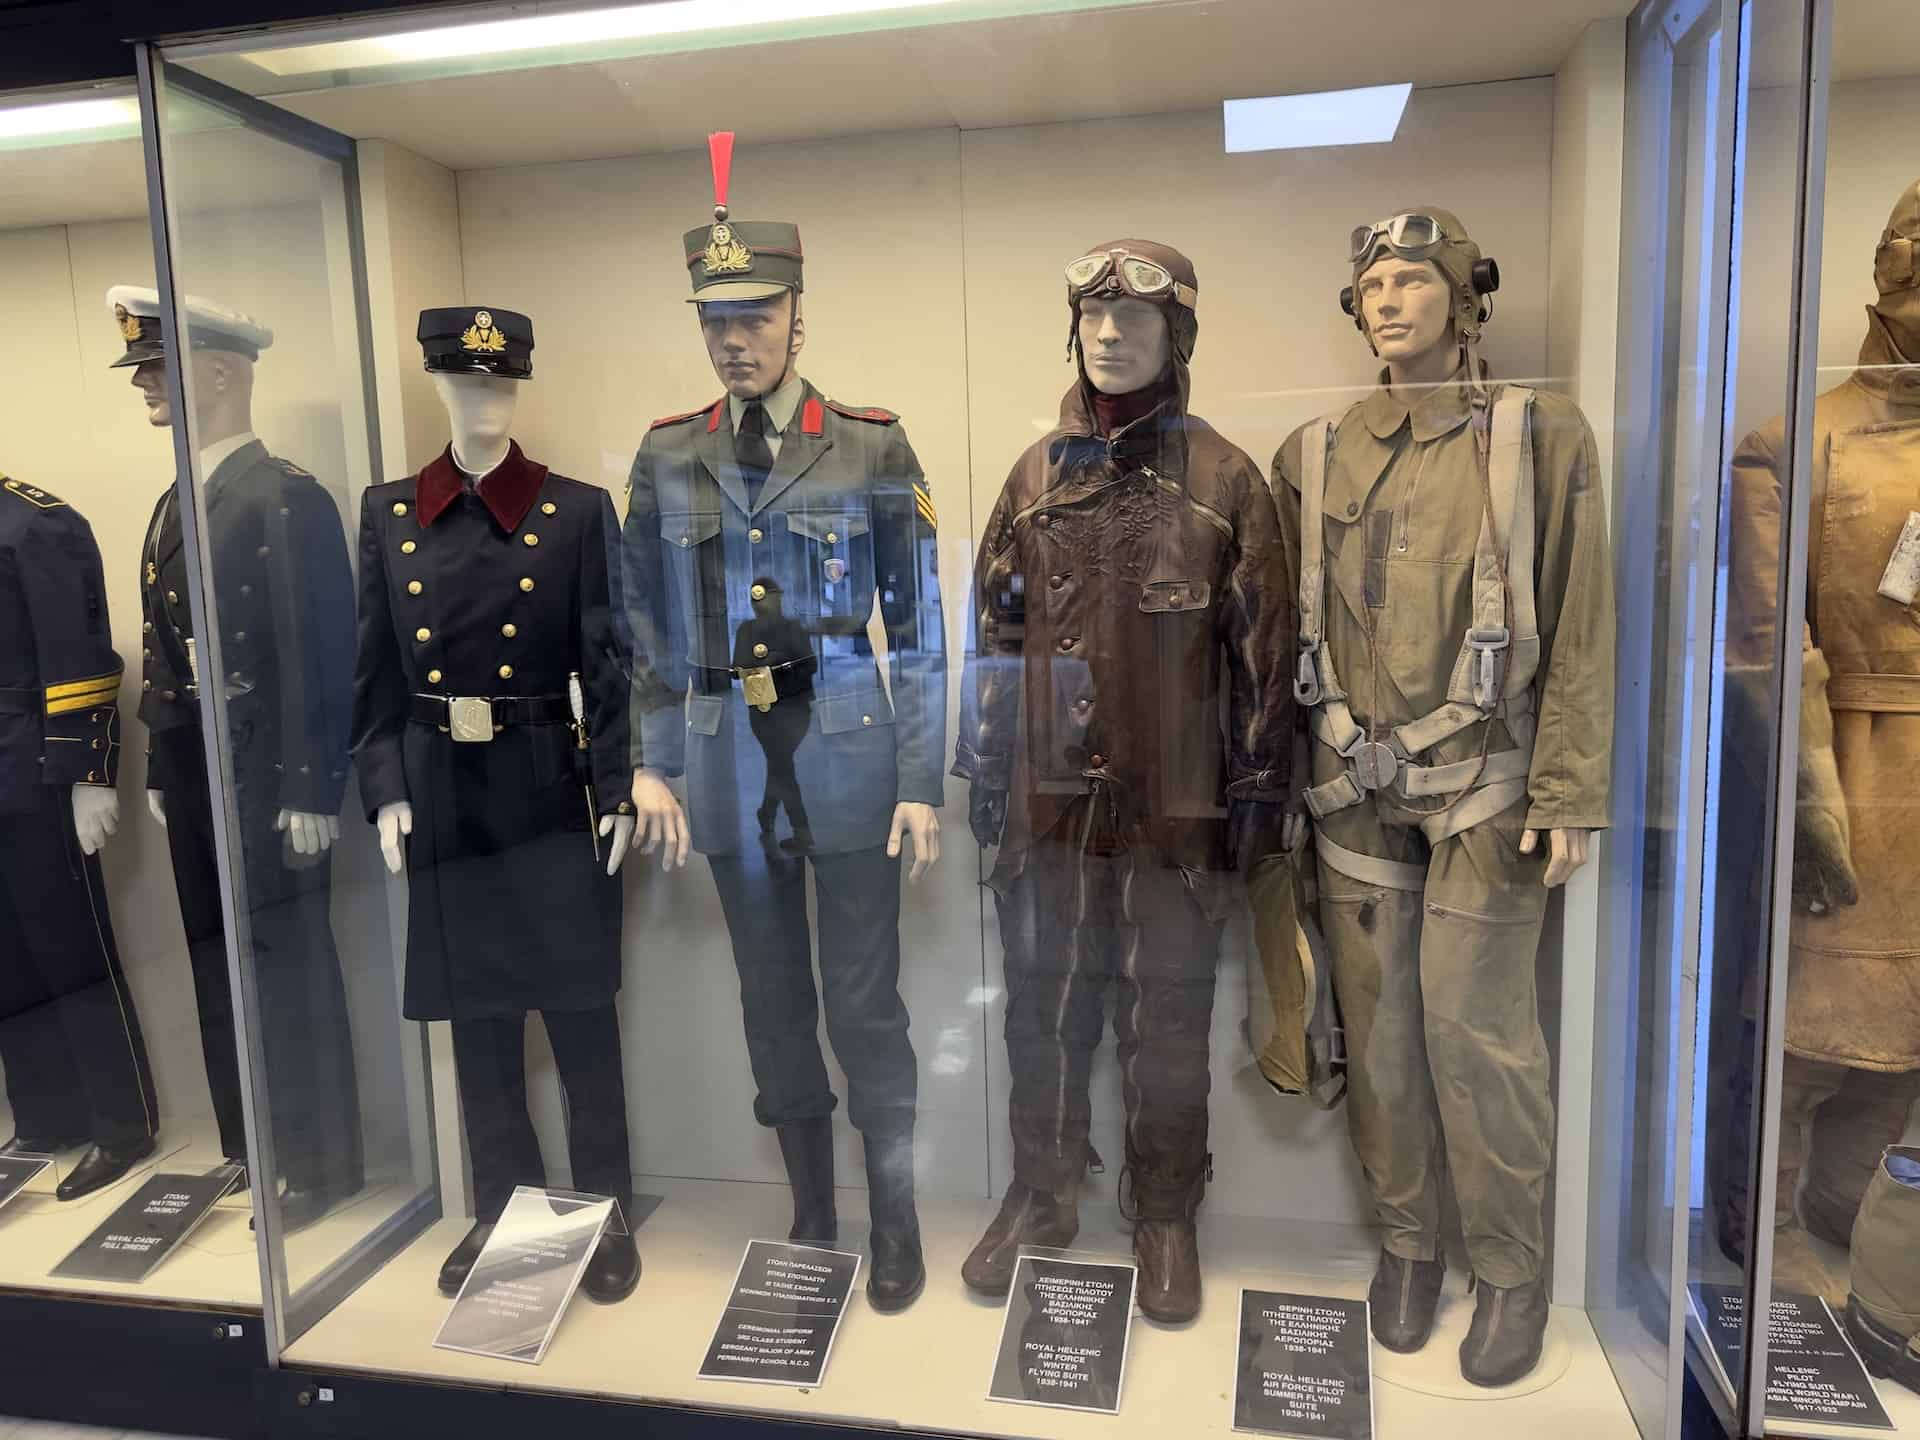 Hellenic Military Academy combat support officer's cadet full dress (left); Ceremonial uniform, 3rd class student seargent major of the army permanent school NCO (center left); Royal Hellenic Air Force winter flying suit, 1938-1941 (center right); Royal Hellenic Air Force summer flying suit, 1938-1941 (right) at the War Museum in Athens, Greece